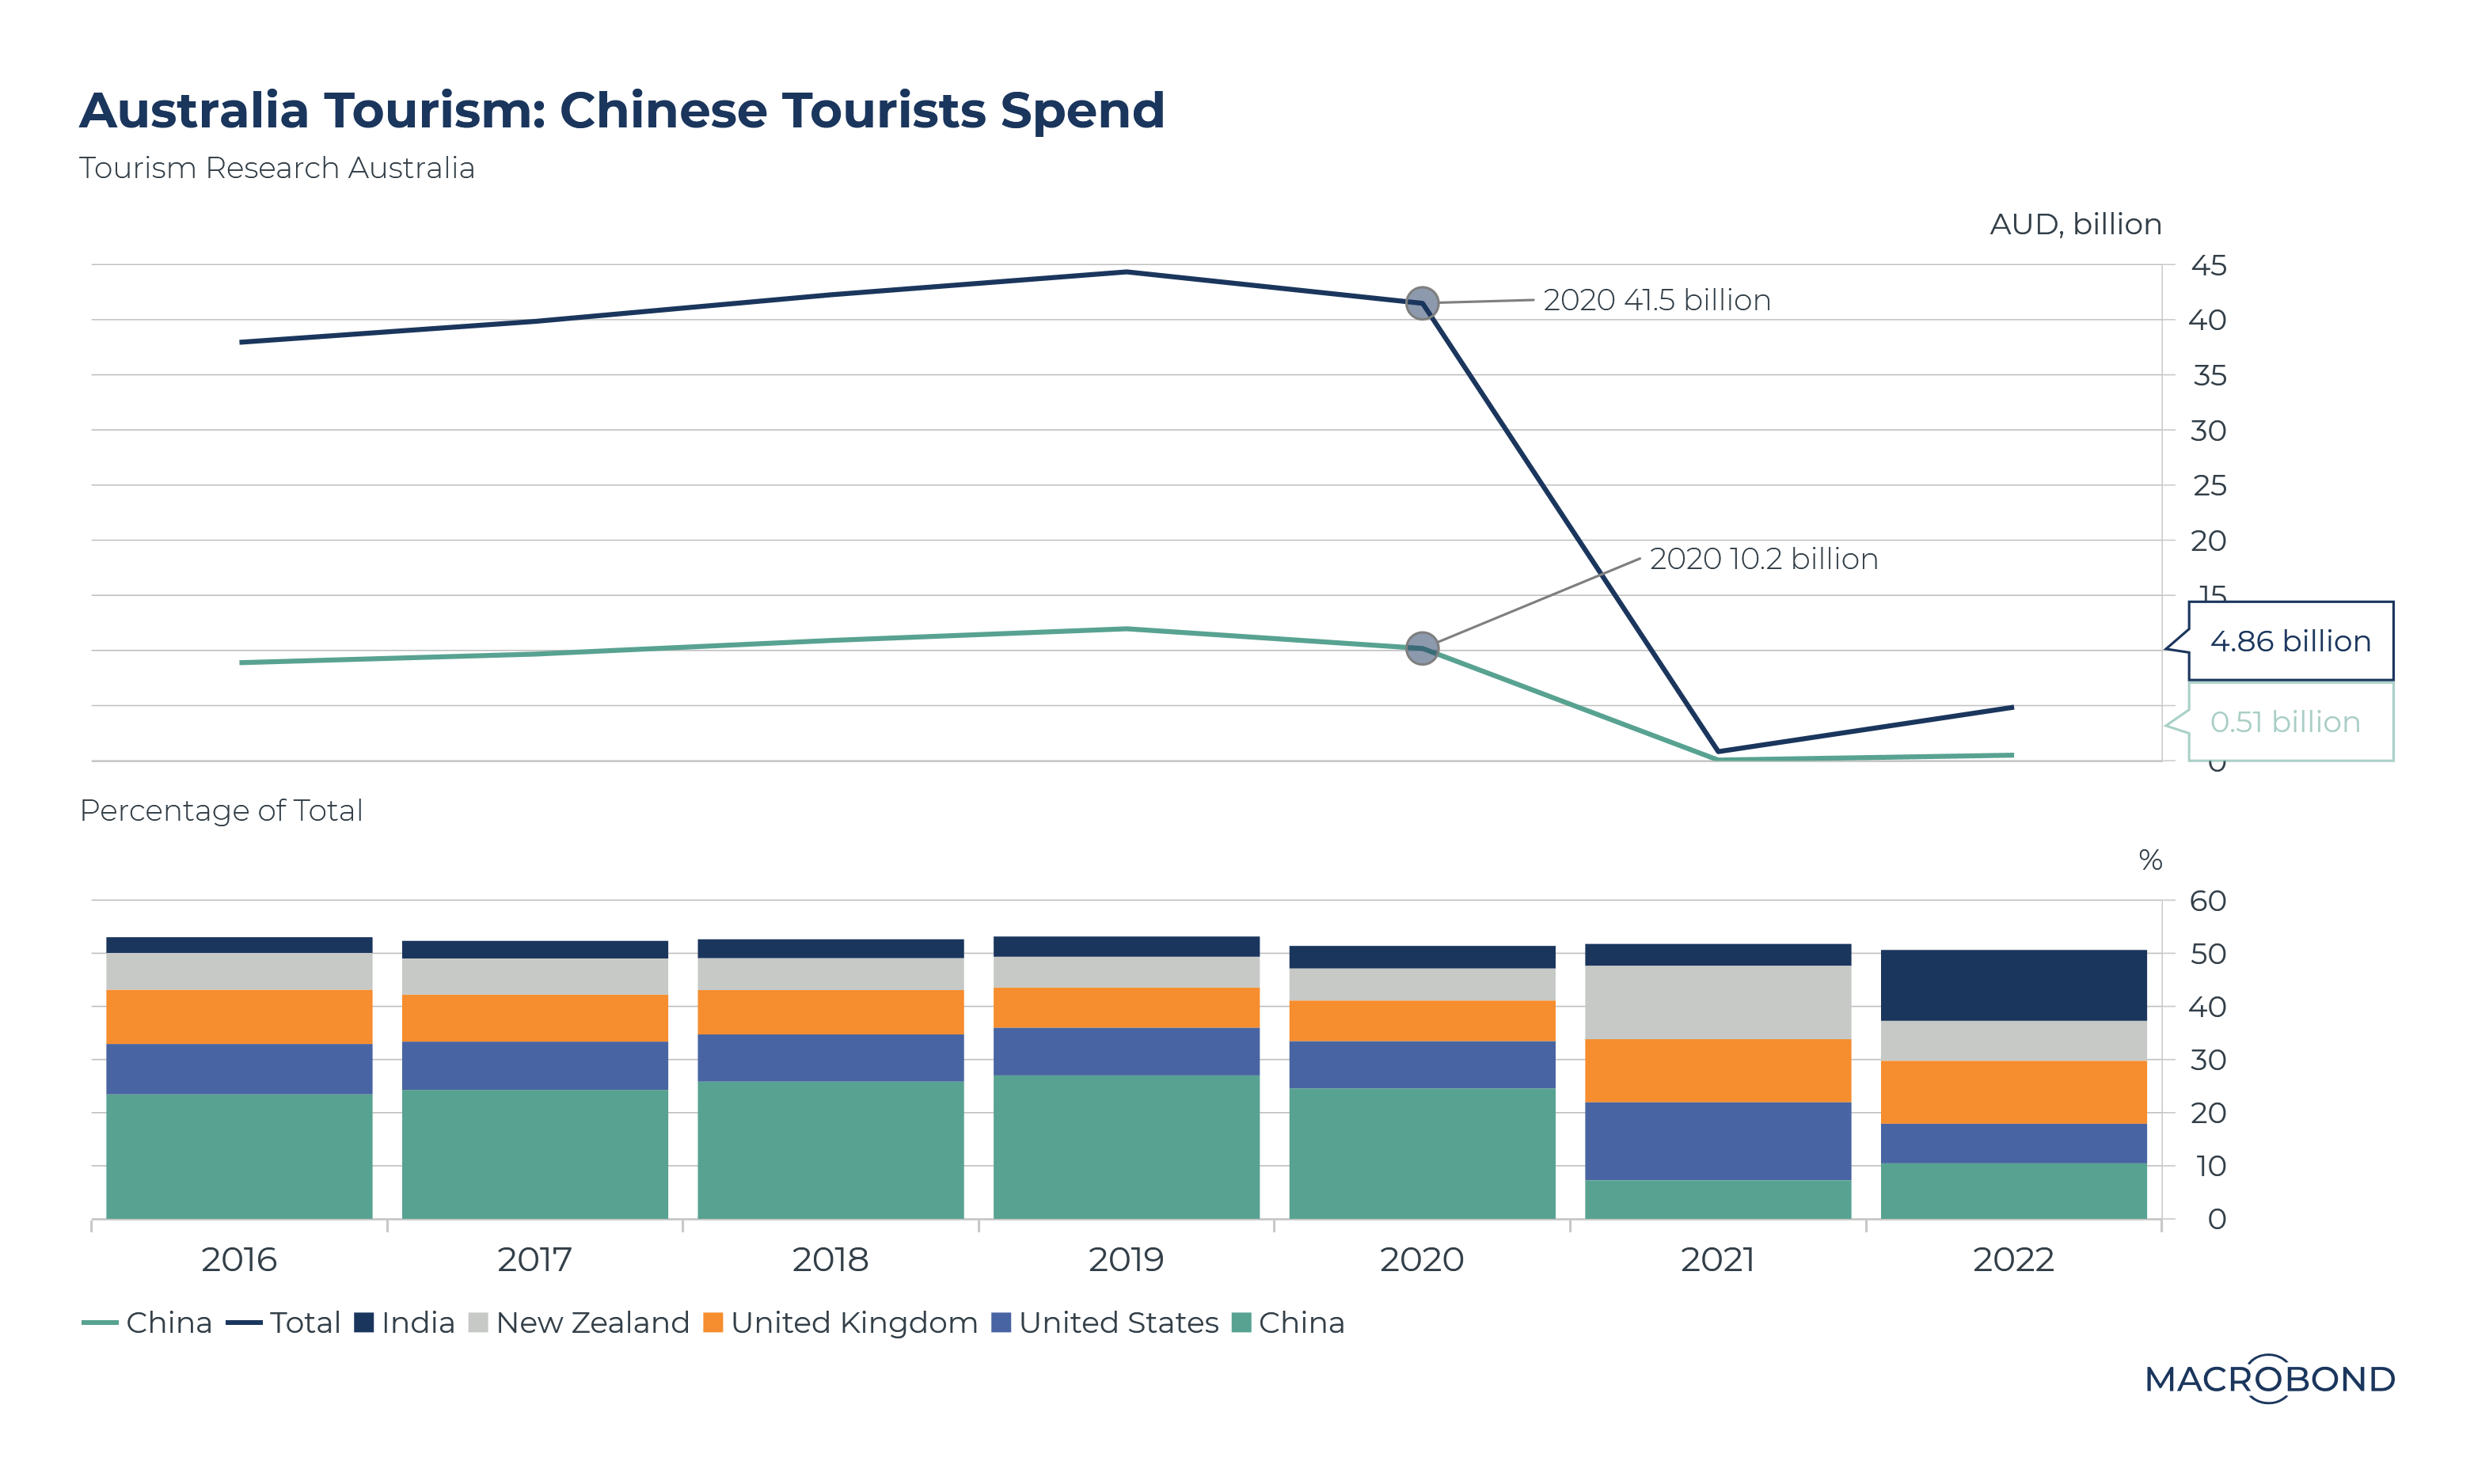 In 2019 visitors from China accounted for roughly 25% of all tourist spending